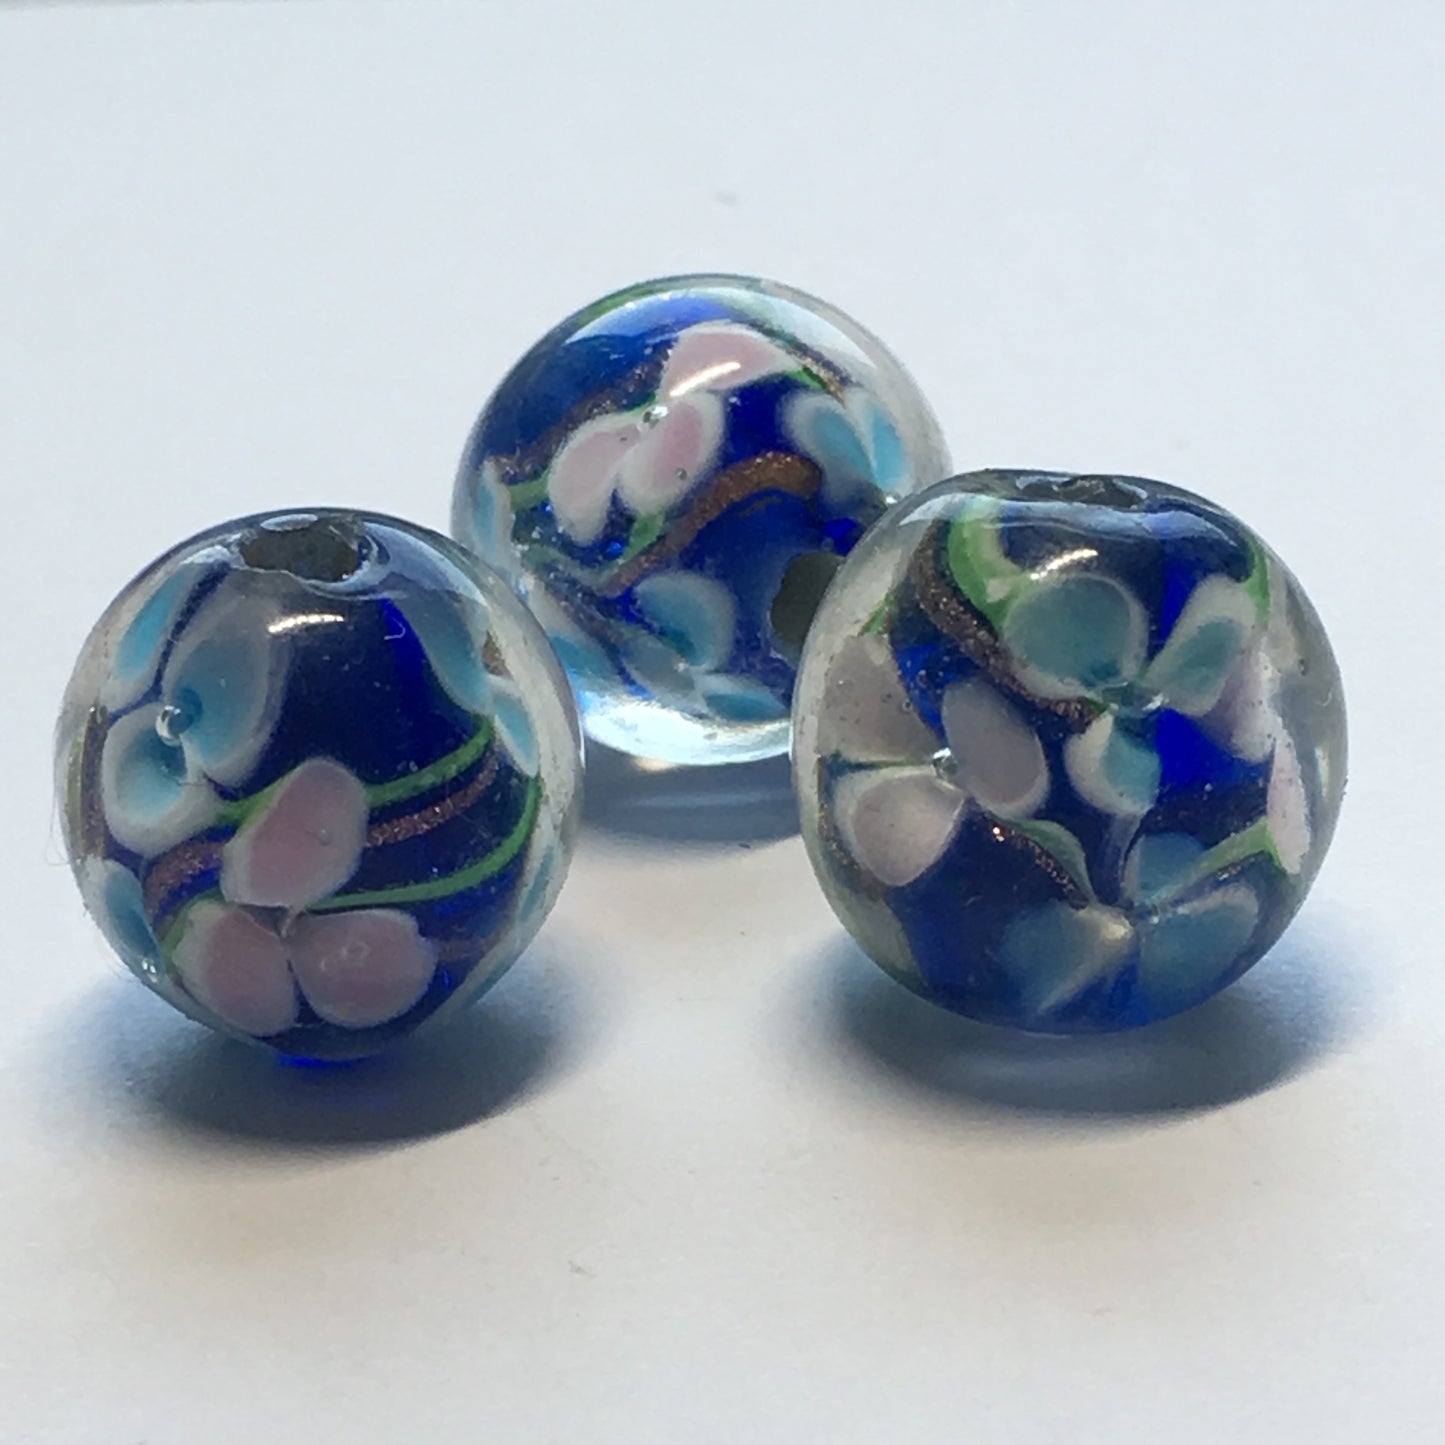 Clear with Pink Flowers on Blue Glass Core Lampwork Round Beads, 14 mm - 3 Beads